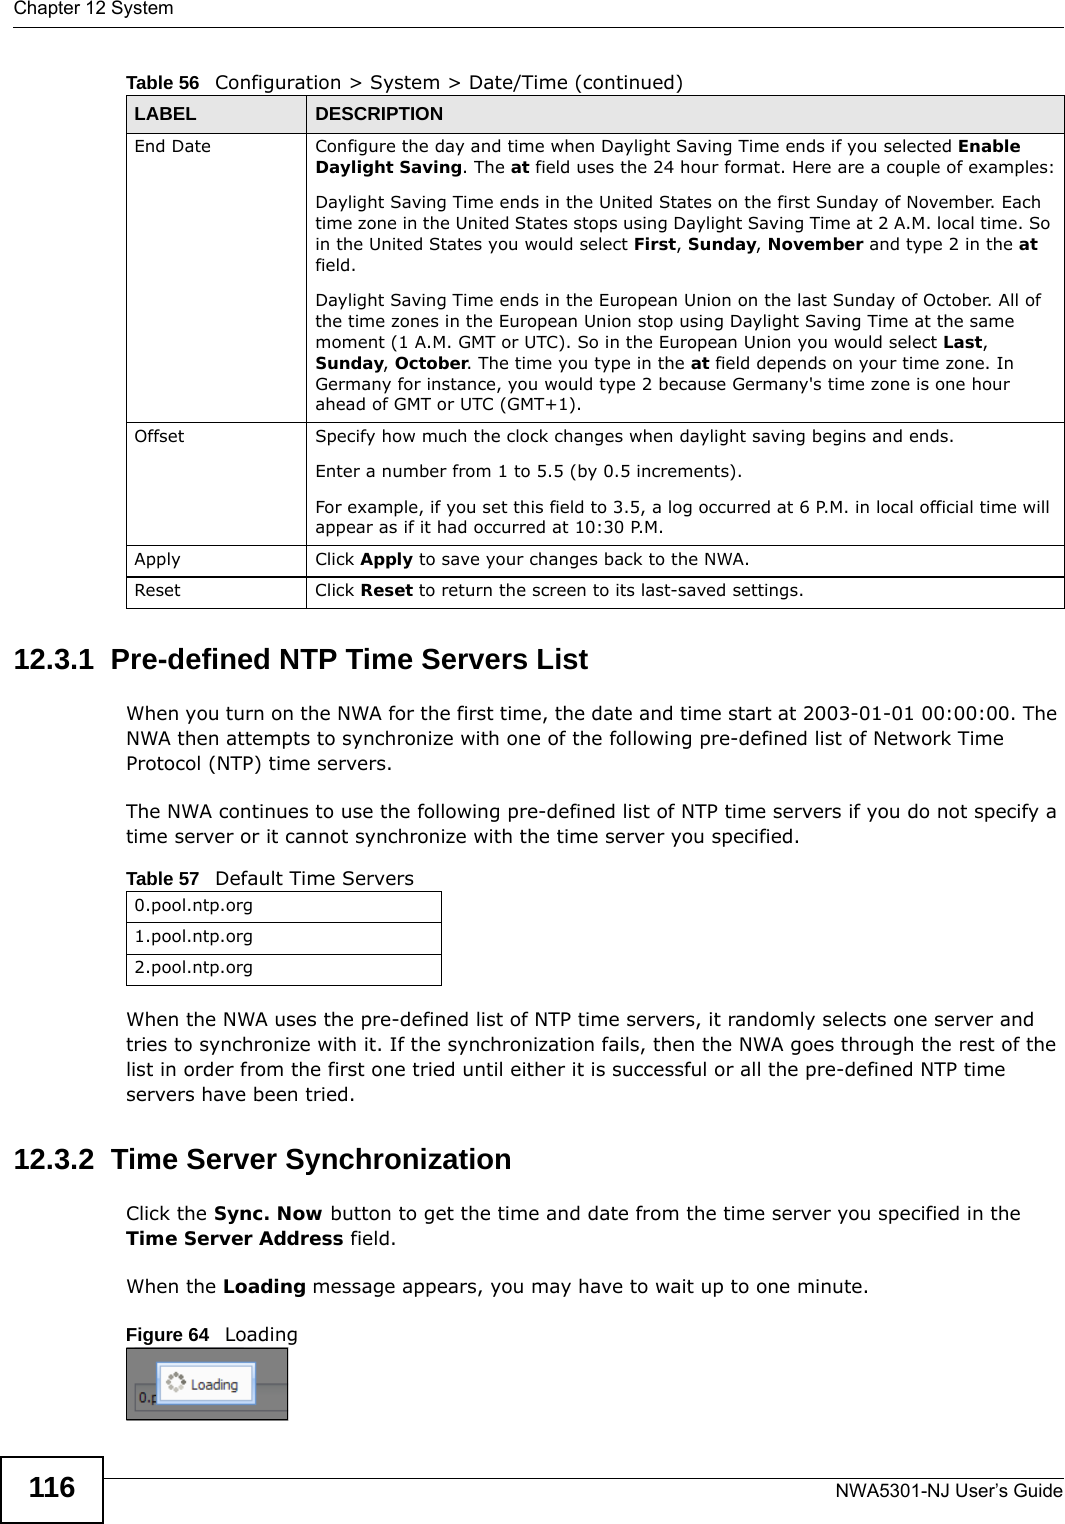 Chapter 12 SystemNWA5301-NJ User’s Guide11612.3.1  Pre-defined NTP Time Servers ListWhen you turn on the NWA for the first time, the date and time start at 2003-01-01 00:00:00. The NWA then attempts to synchronize with one of the following pre-defined list of Network Time Protocol (NTP) time servers.The NWA continues to use the following pre-defined list of NTP time servers if you do not specify a time server or it cannot synchronize with the time server you specified. When the NWA uses the pre-defined list of NTP time servers, it randomly selects one server and tries to synchronize with it. If the synchronization fails, then the NWA goes through the rest of the list in order from the first one tried until either it is successful or all the pre-defined NTP time servers have been tried.12.3.2  Time Server SynchronizationClick the Sync. Now button to get the time and date from the time server you specified in the Time Server Address field.When the Loading message appears, you may have to wait up to one minute.Figure 64   LoadingEnd Date Configure the day and time when Daylight Saving Time ends if you selected Enable Daylight Saving. The at field uses the 24 hour format. Here are a couple of examples:Daylight Saving Time ends in the United States on the first Sunday of November. Each time zone in the United States stops using Daylight Saving Time at 2 A.M. local time. So in the United States you would select First, Sunday, November and type 2 in the at field.Daylight Saving Time ends in the European Union on the last Sunday of October. All of the time zones in the European Union stop using Daylight Saving Time at the same moment (1 A.M. GMT or UTC). So in the European Union you would select Last, Sunday, October. The time you type in the at field depends on your time zone. In Germany for instance, you would type 2 because Germany&apos;s time zone is one hour ahead of GMT or UTC (GMT+1). Offset Specify how much the clock changes when daylight saving begins and ends. Enter a number from 1 to 5.5 (by 0.5 increments). For example, if you set this field to 3.5, a log occurred at 6 P.M. in local official time will appear as if it had occurred at 10:30 P.M.Apply Click Apply to save your changes back to the NWA.Reset Click Reset to return the screen to its last-saved settings. Table 56   Configuration &gt; System &gt; Date/Time (continued)LABEL DESCRIPTIONTable 57   Default Time Servers0.pool.ntp.org1.pool.ntp.org2.pool.ntp.org